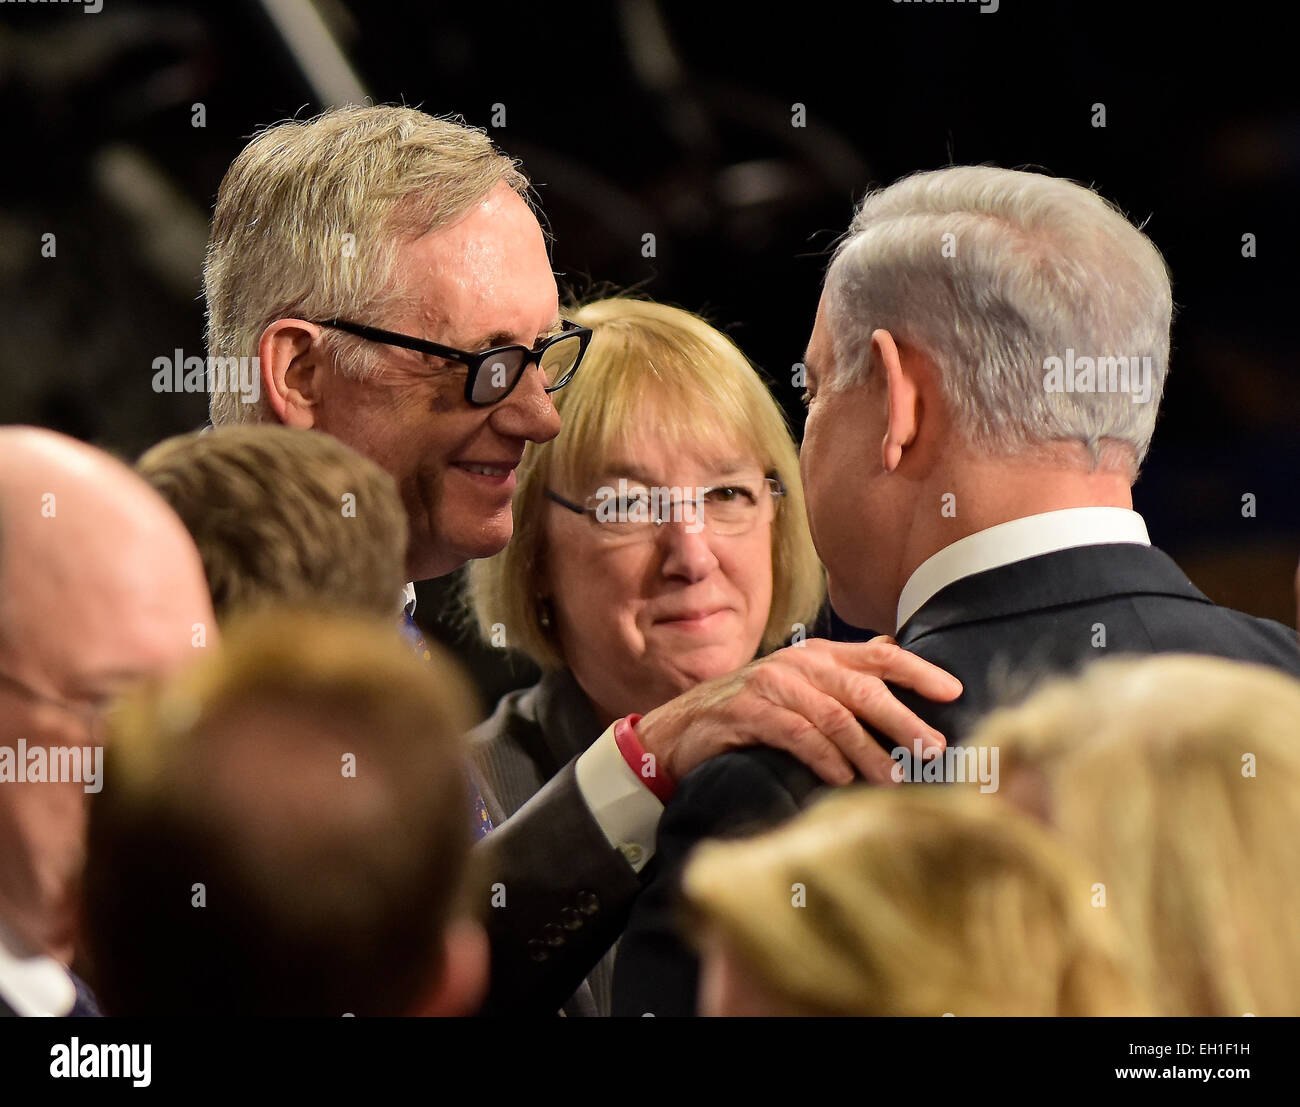 United States Senate Minority Leader Harry Reid (Democrat of Nevada) greets Prime Minister Benjamin Netanyahu of Israel as he arrives to deliver an address to a joint session of the United States Congress in the U.S. Capitol in Washington, DC on Tuesday, March 3, 2015. At center is U.S. Senator Patty Murray (Democrat of Washington). Credit: Ron Sachs/CNP (RESTRICTION: NO New York or New Jersey Newspapers or newspapers within a 75 mile radius of New York City) - NO WIRE SERVICE - Stock Photo